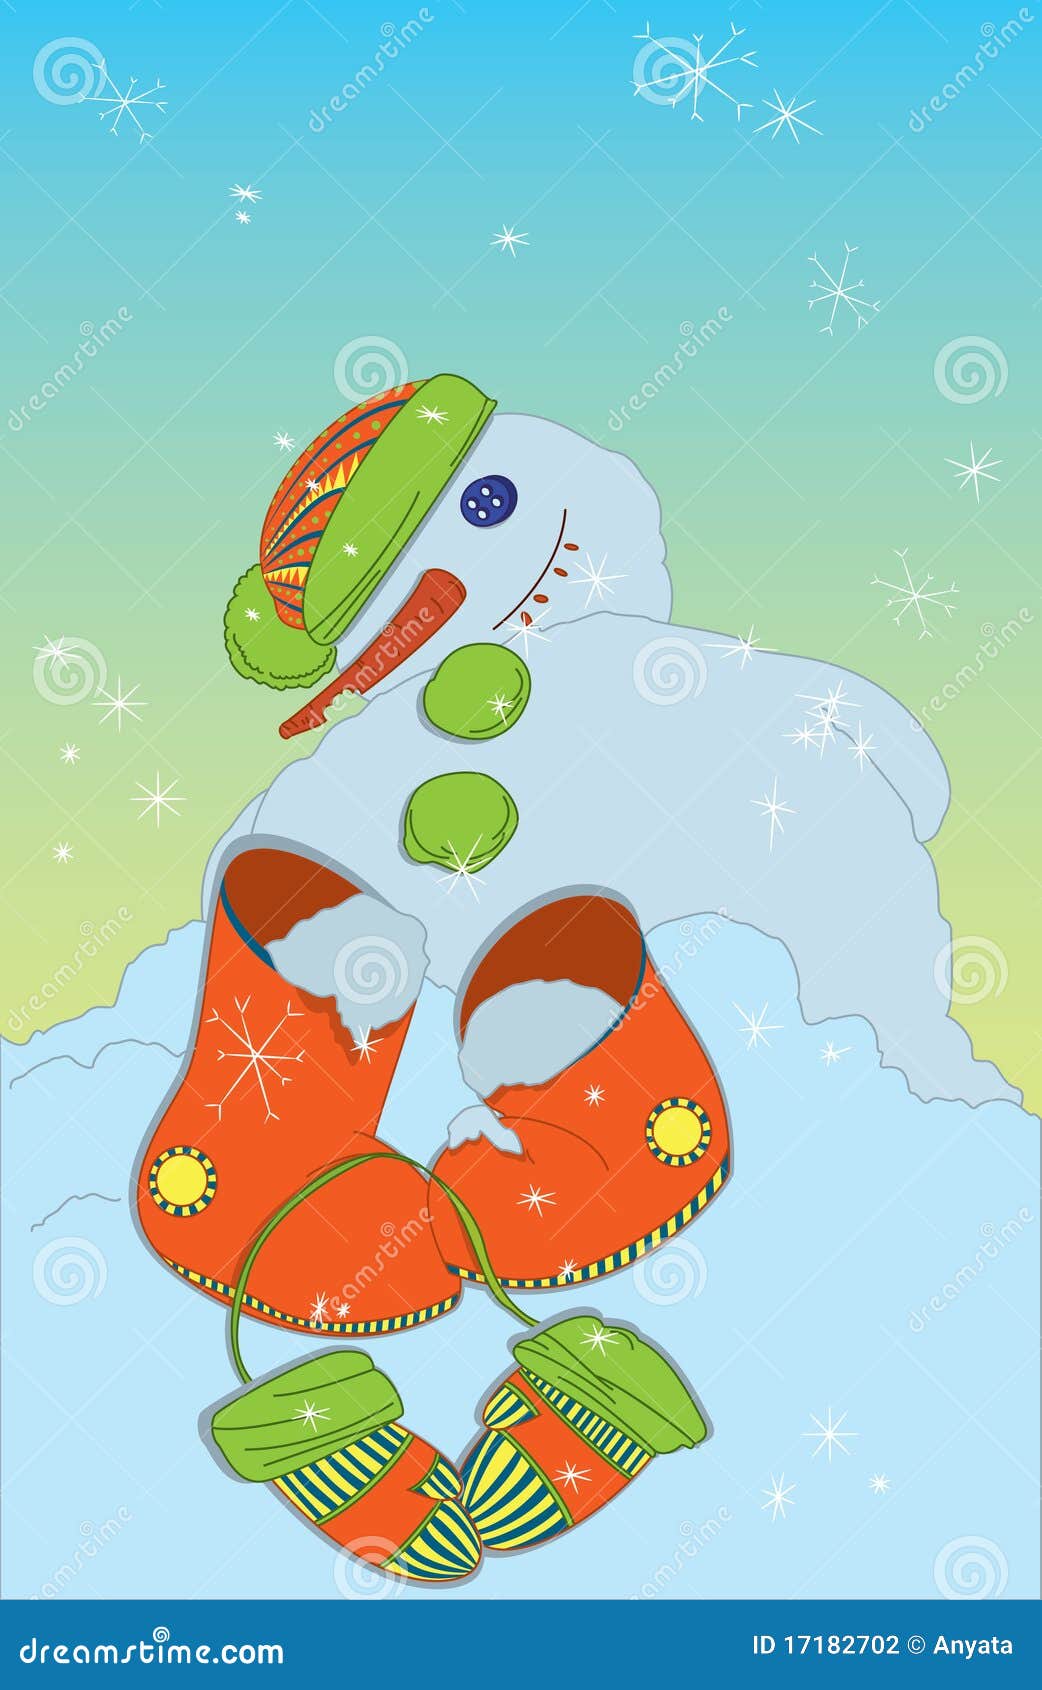 Melting Snowman With Boots And Mittens Stock Photography - Image: 17182702